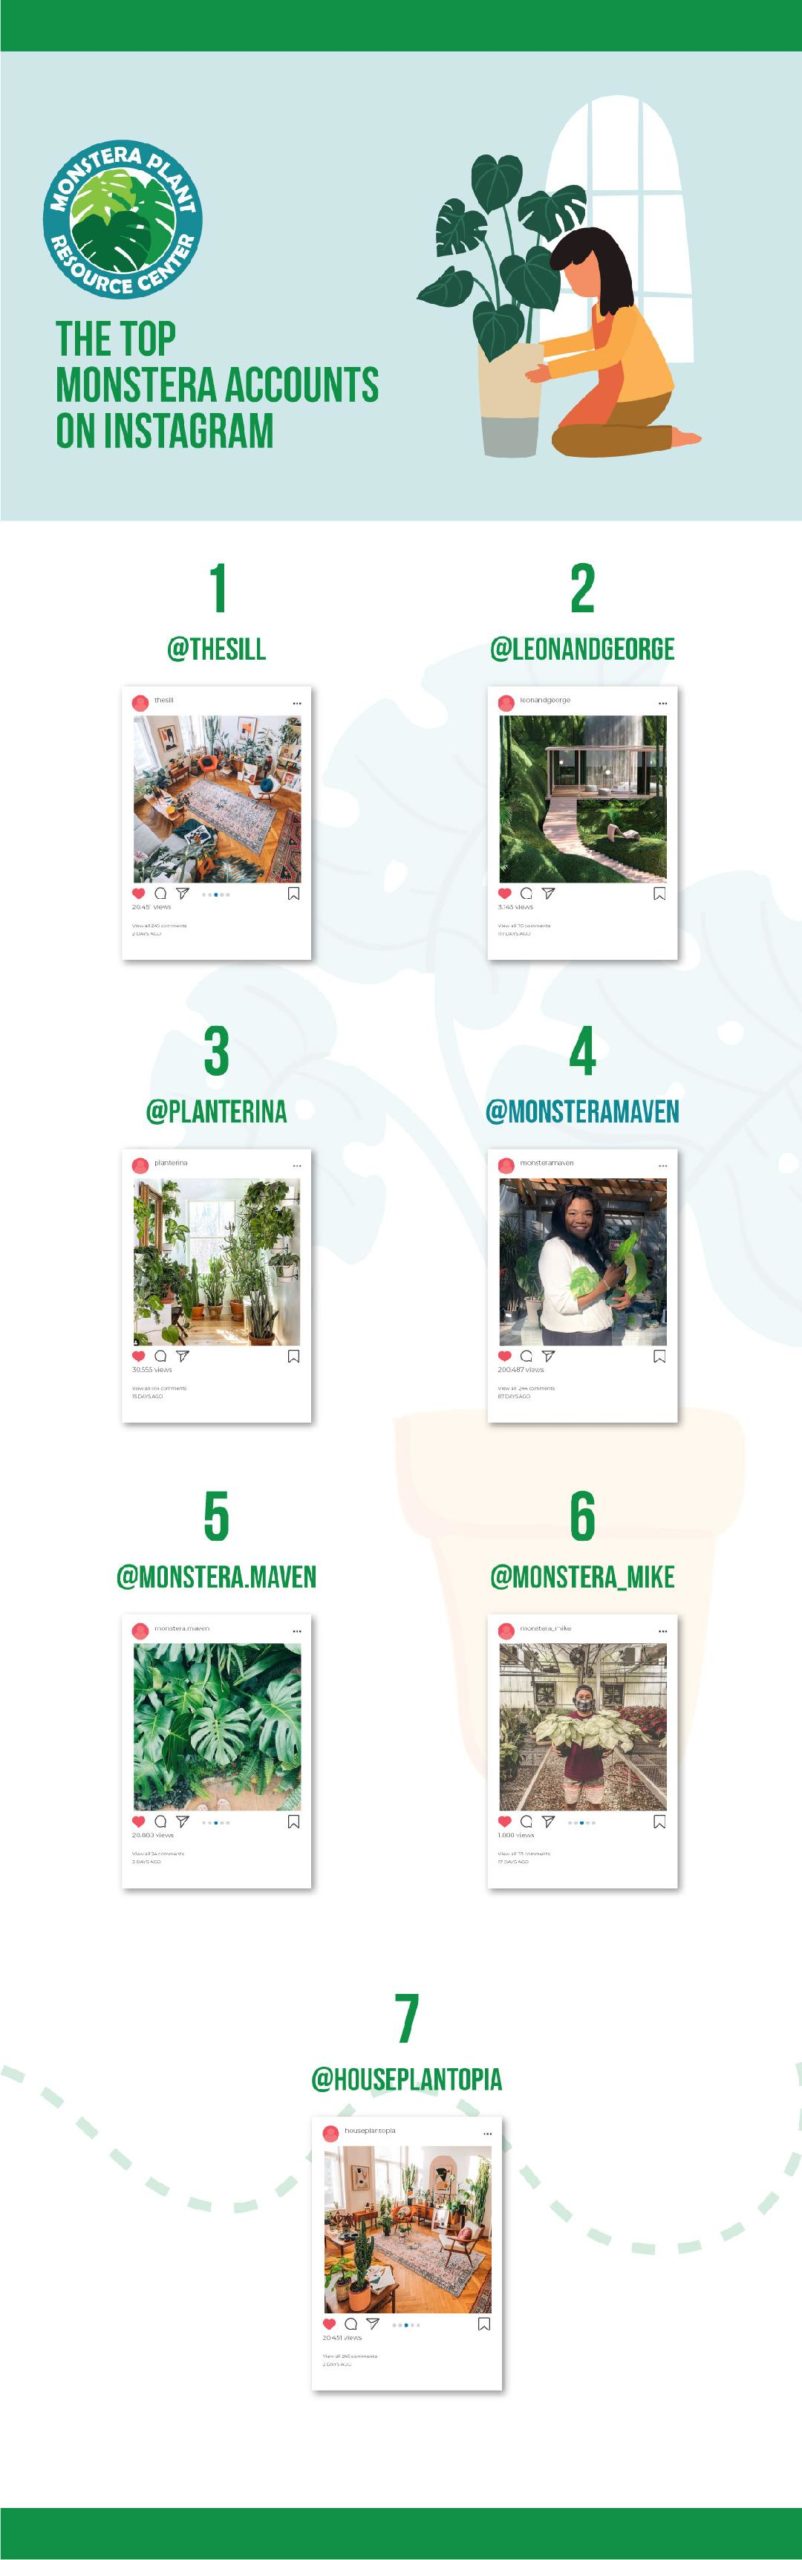 Monstera plants on Instagram are really popular. Learn more about caring for your monstera plant by following these top monstera plant Instagram accounts.